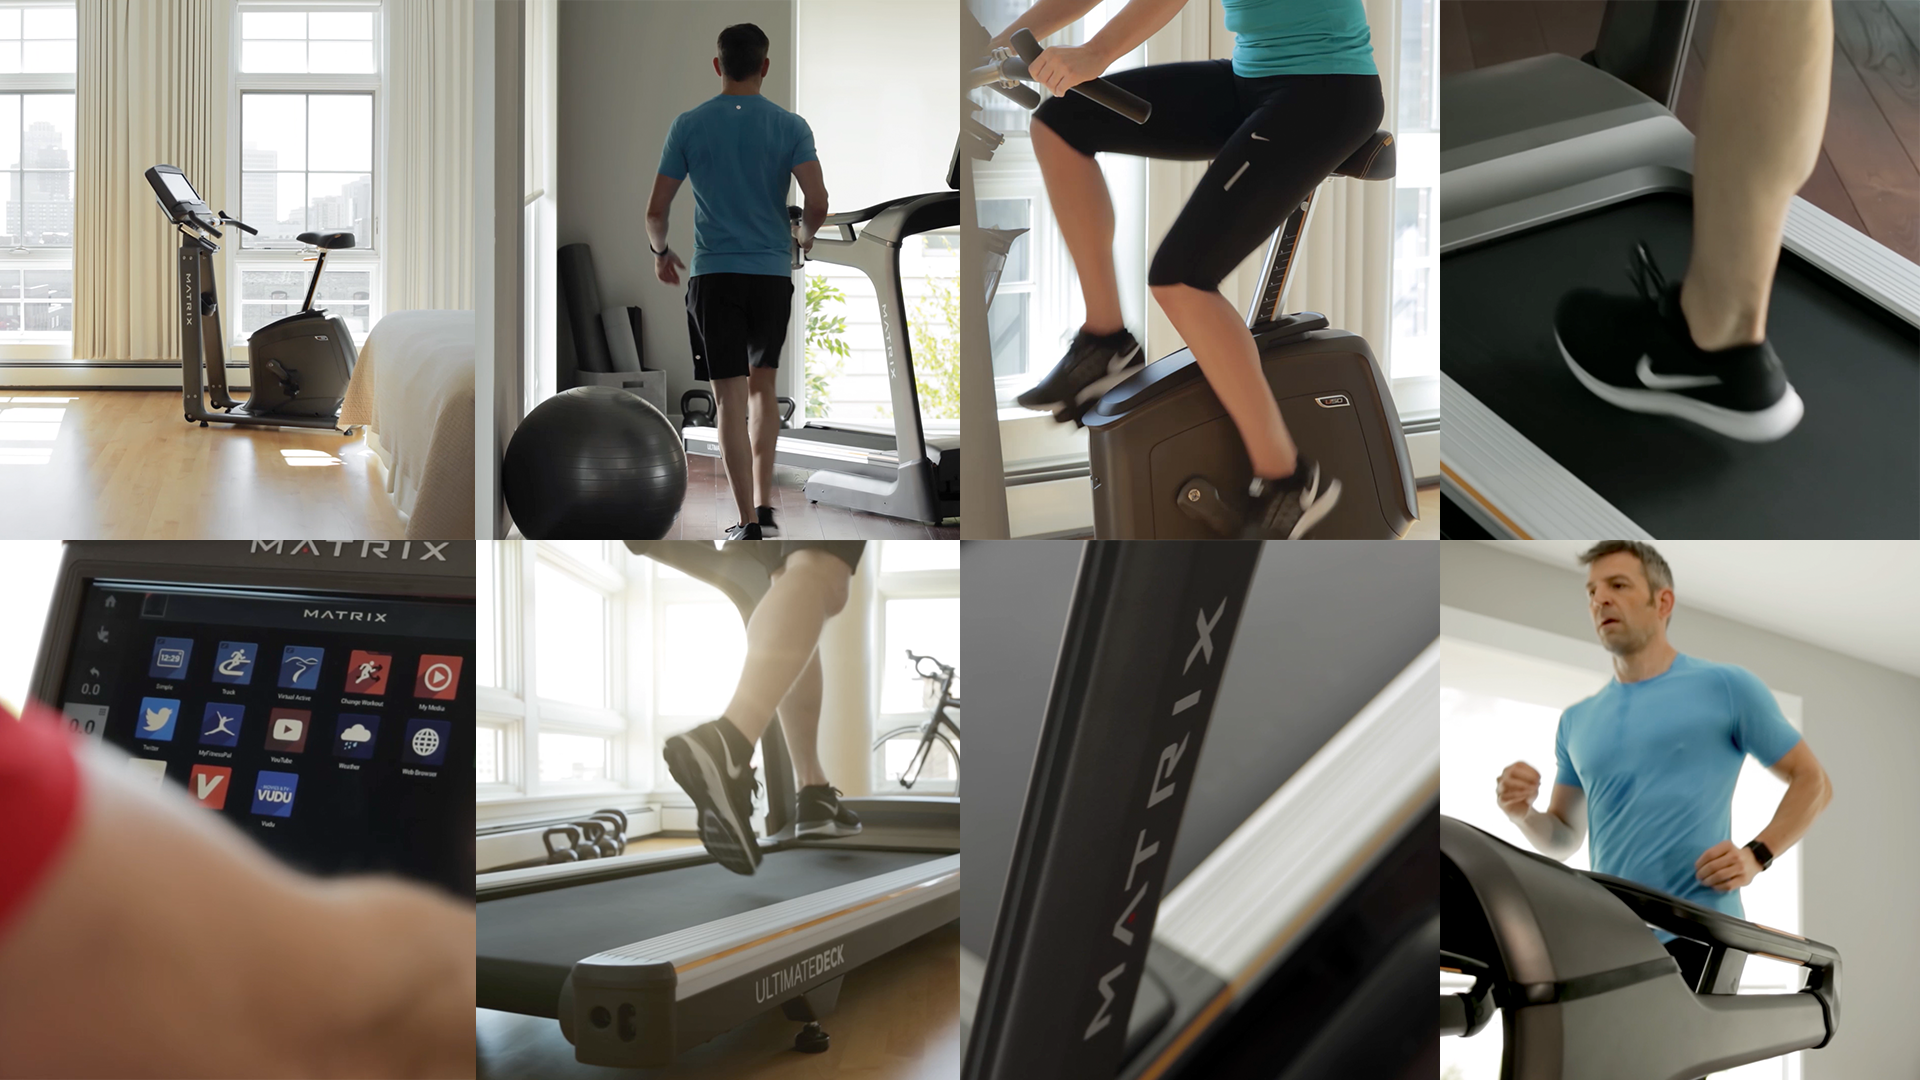 A collage of style frame images featuring a stationery bike, a man approaching a treadmill, a close up of feet on a treadmill and stationery bike, a Matrix fitness screen positioned at the top of a workout machine, and a man running on a treadmill.